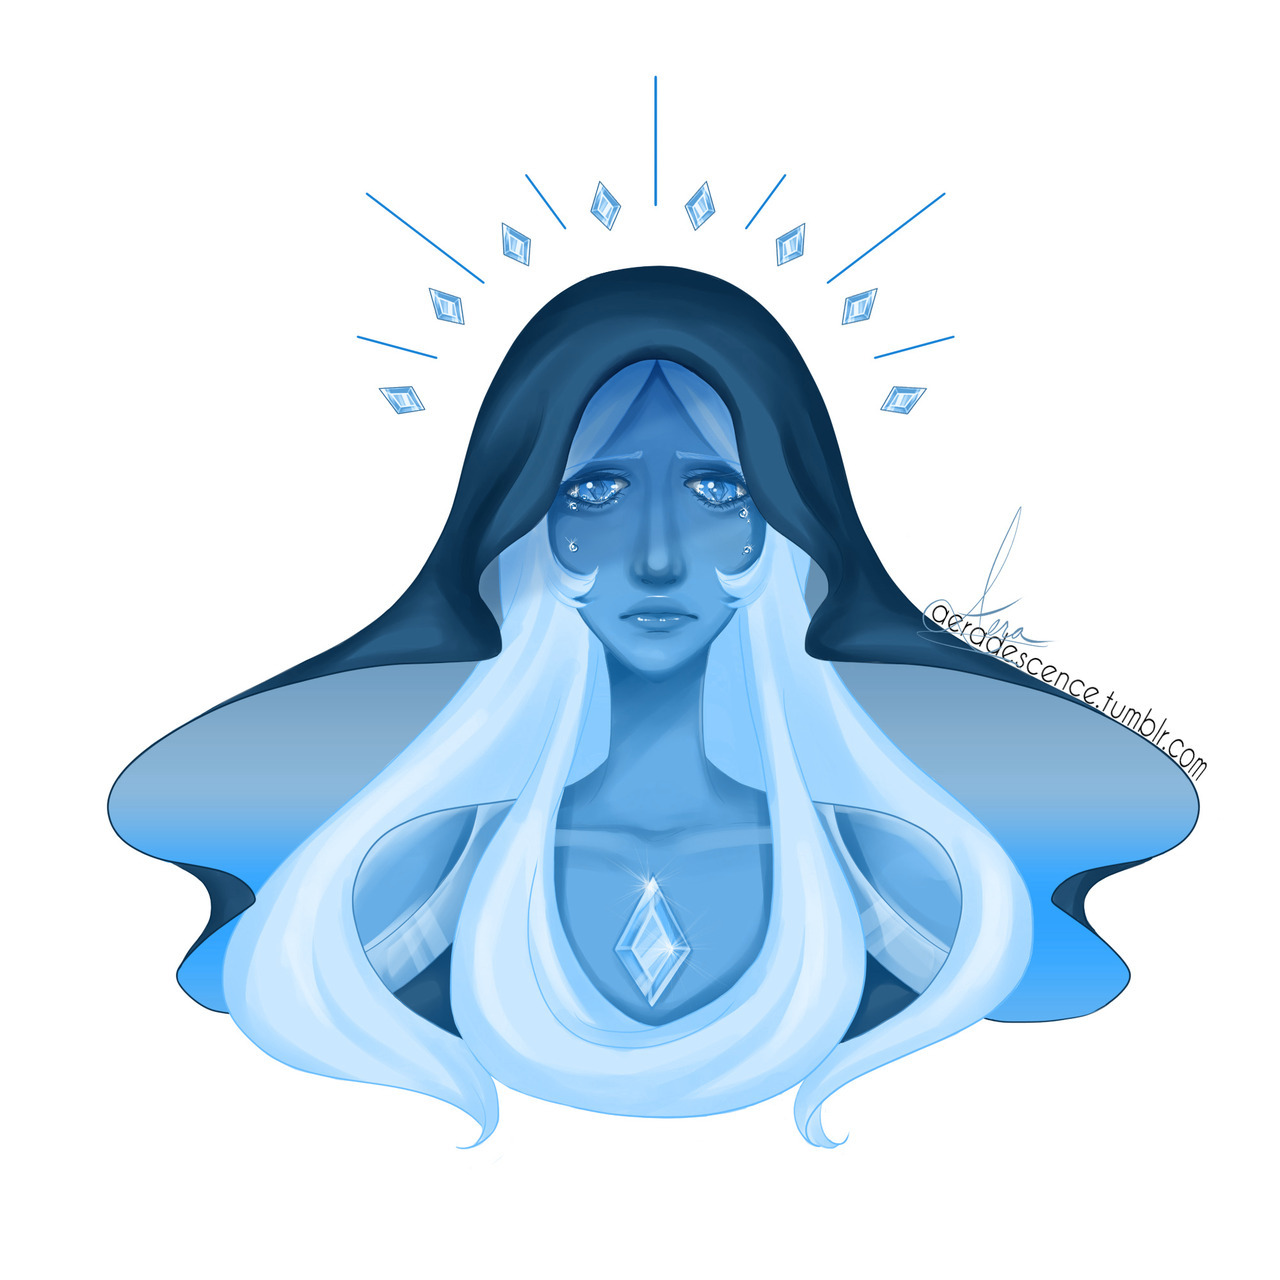 Bust commission of Blue Diamond for @shellbow My bust commissions are still open!